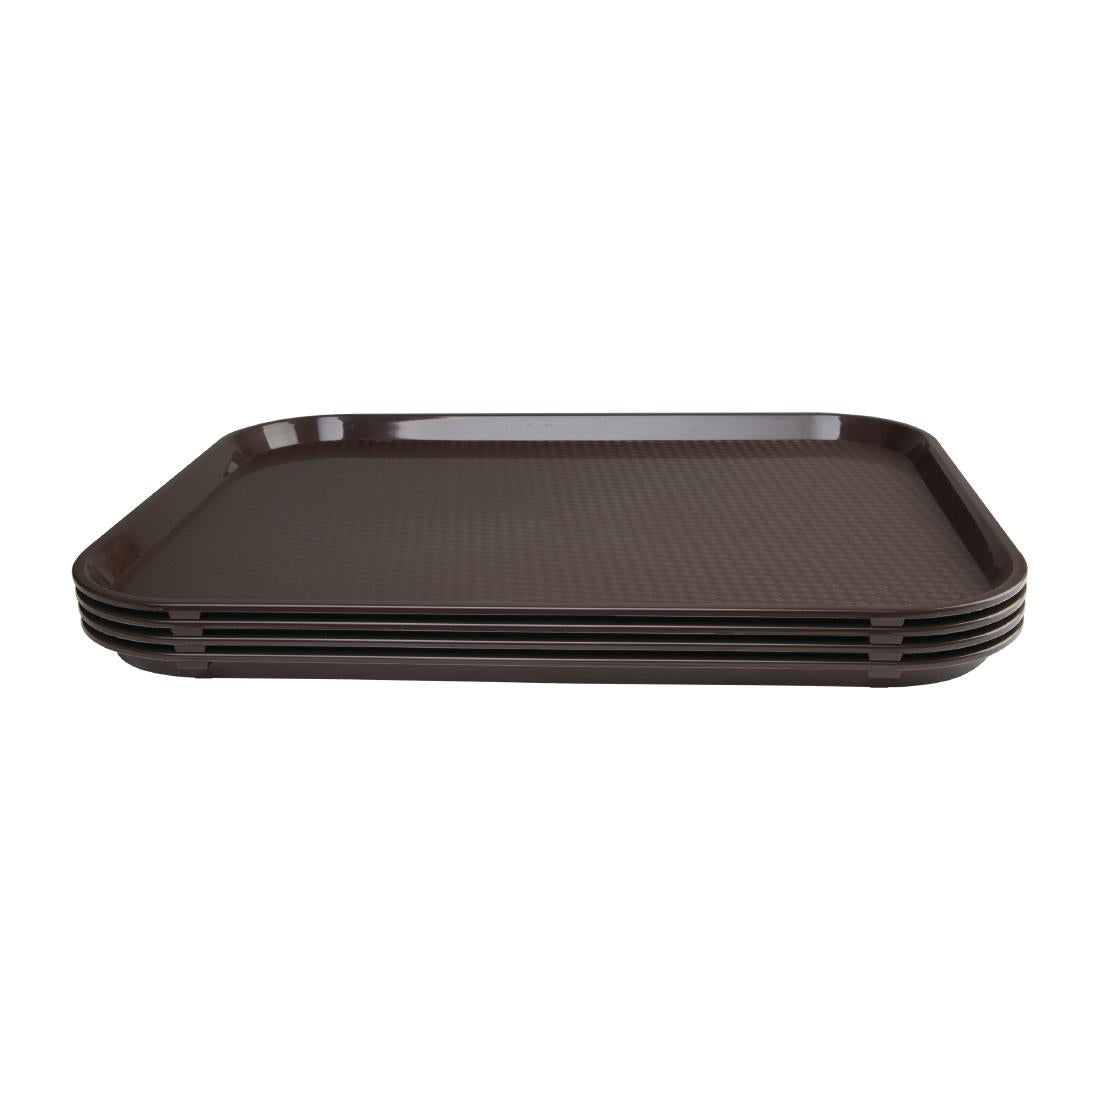 Kristallon Large Polypropylene Fast Food Tray Brown 450mm JD Catering Equipment Solutions Ltd